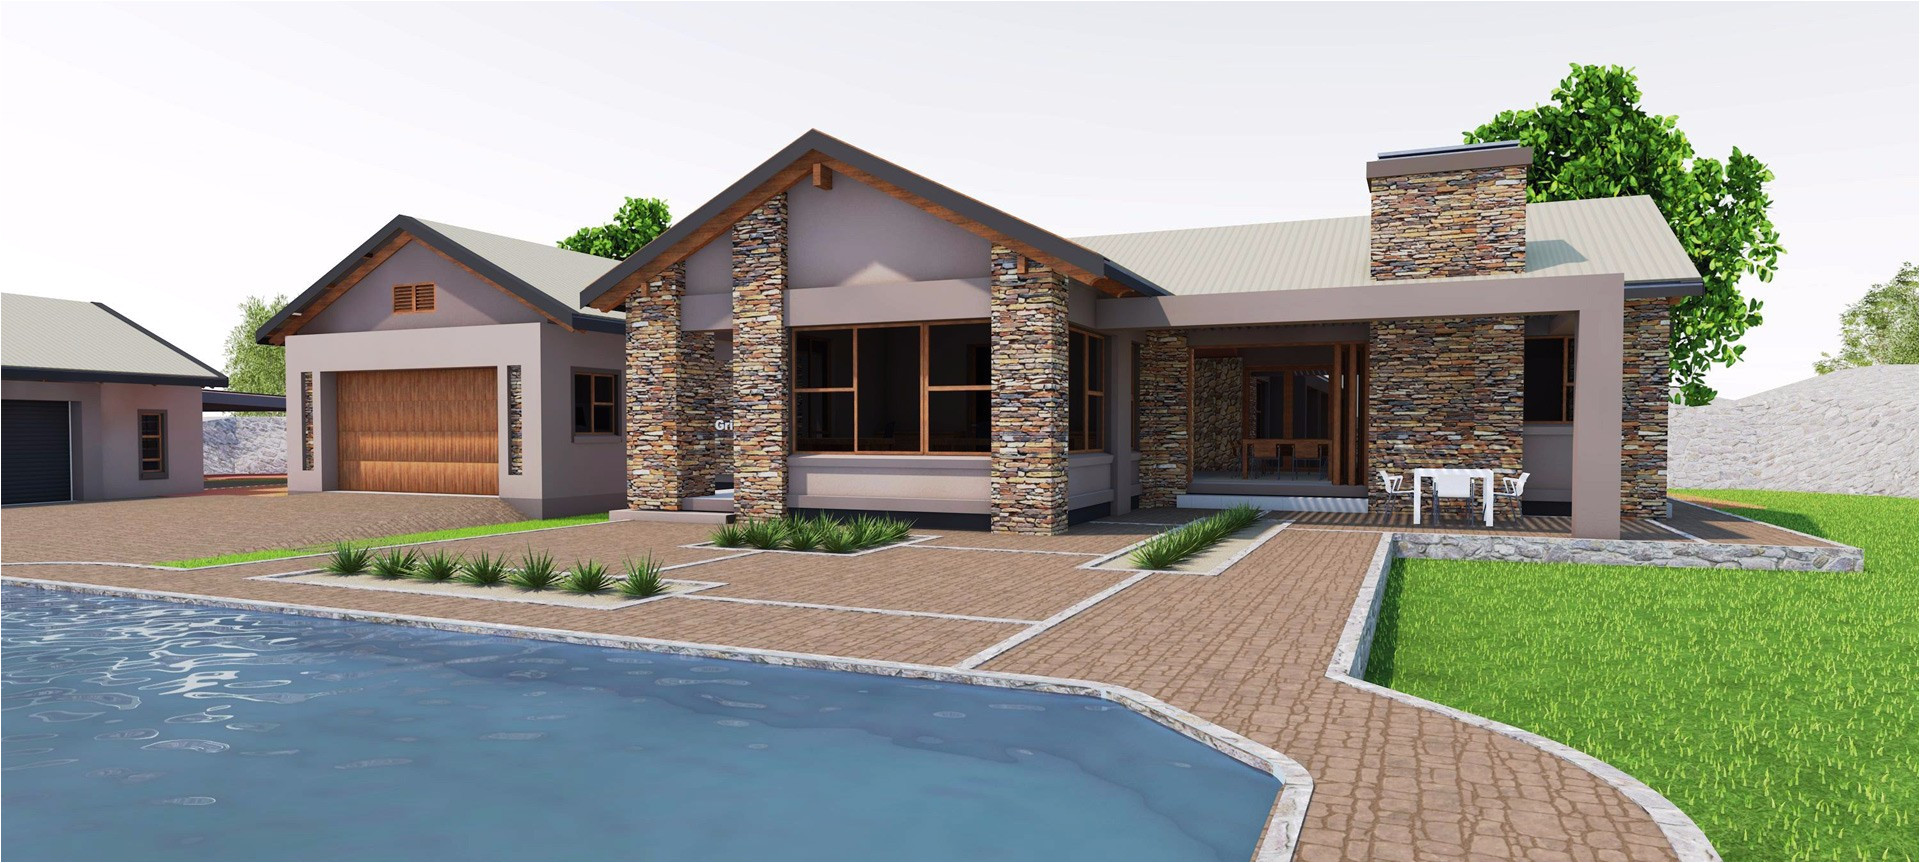 African Home Plans Designs Unique Farm Style House Plans south Africa House Style